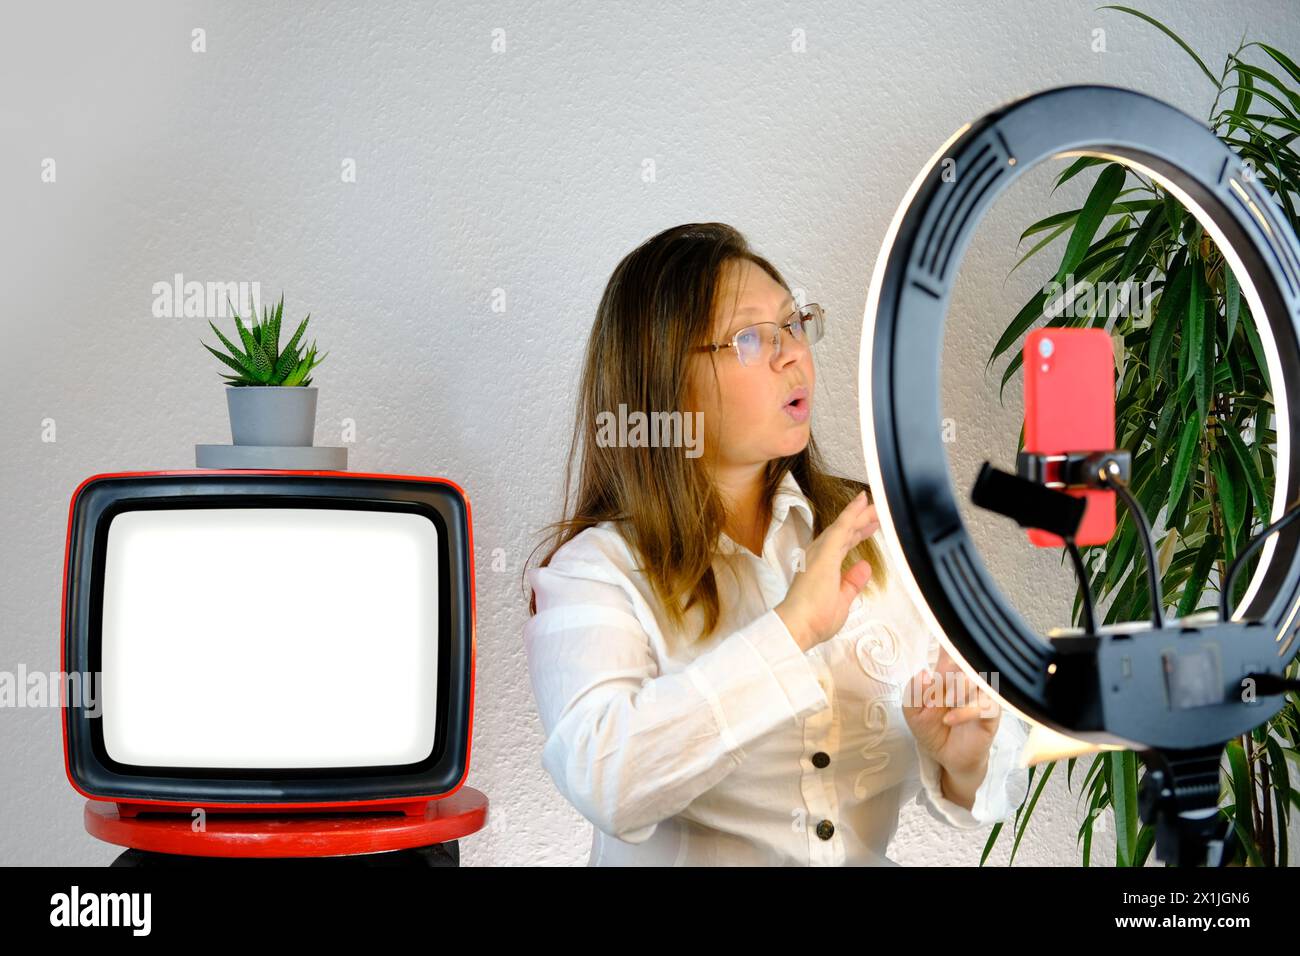 white screen, old retro analog TV, woman 45 years old, female blogger sits in front ring light and red smartphone, emotionally talks on topic of busin Stock Photo